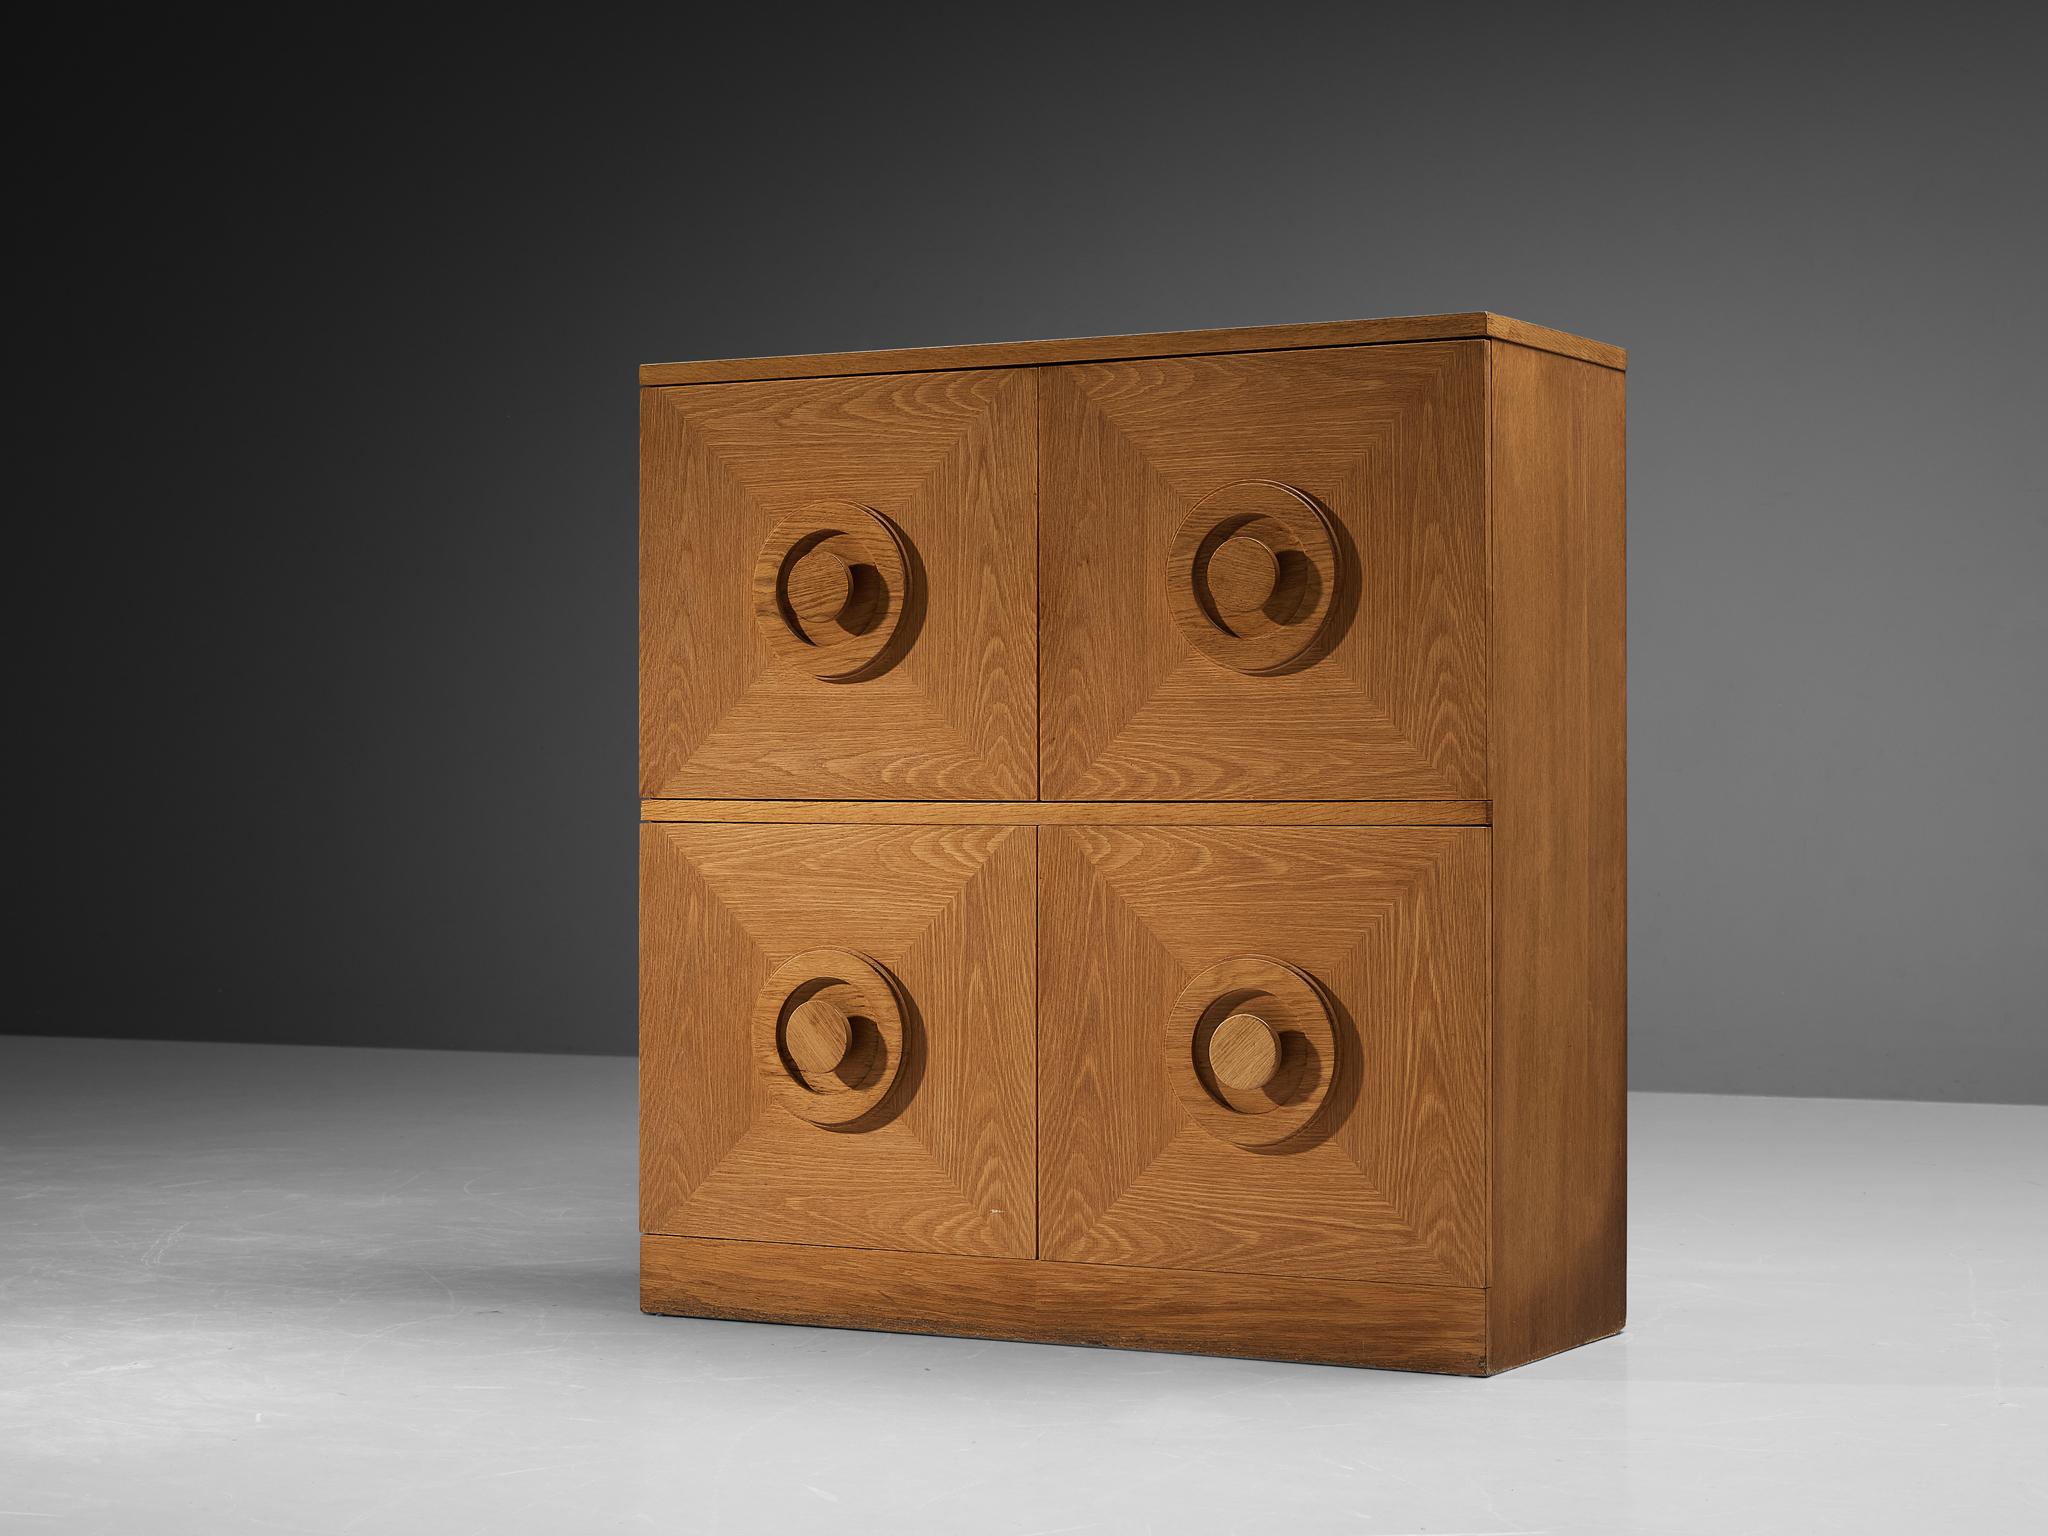 Highboard, stained oak, Belgium, 1970s. 

This very evocative cupboard features a clear rhythm and flow established by means of well thought through lay out that is utterly well-balanced. The round doorknobs immediately catches the eye and is the